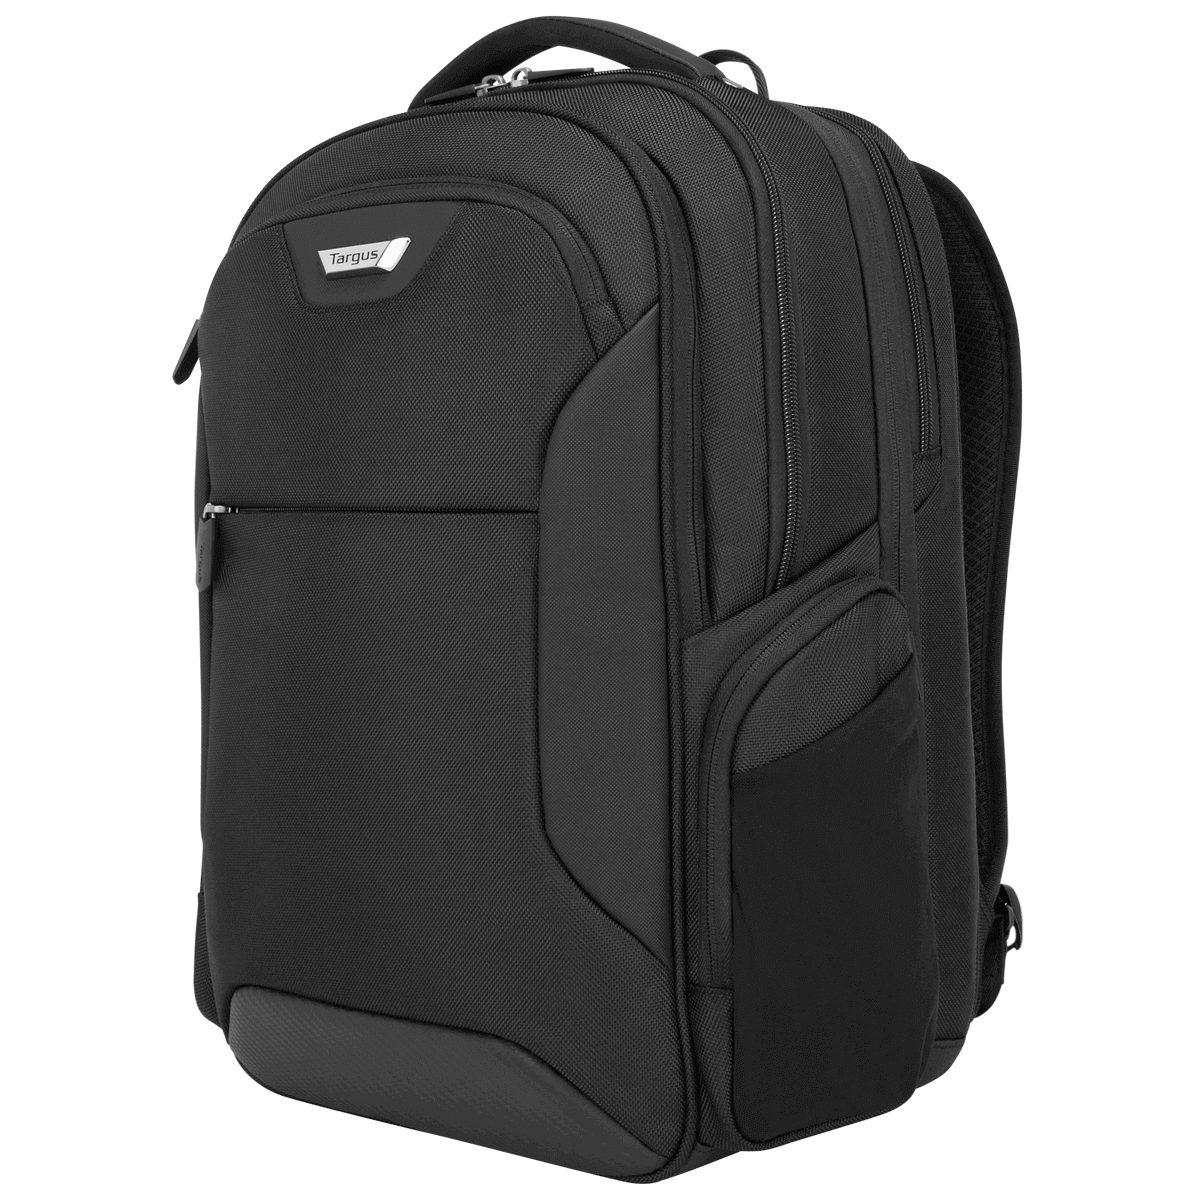 Spruce EcoSmart Checkpoint-Friendly 15.6-inch Backpack Targus 